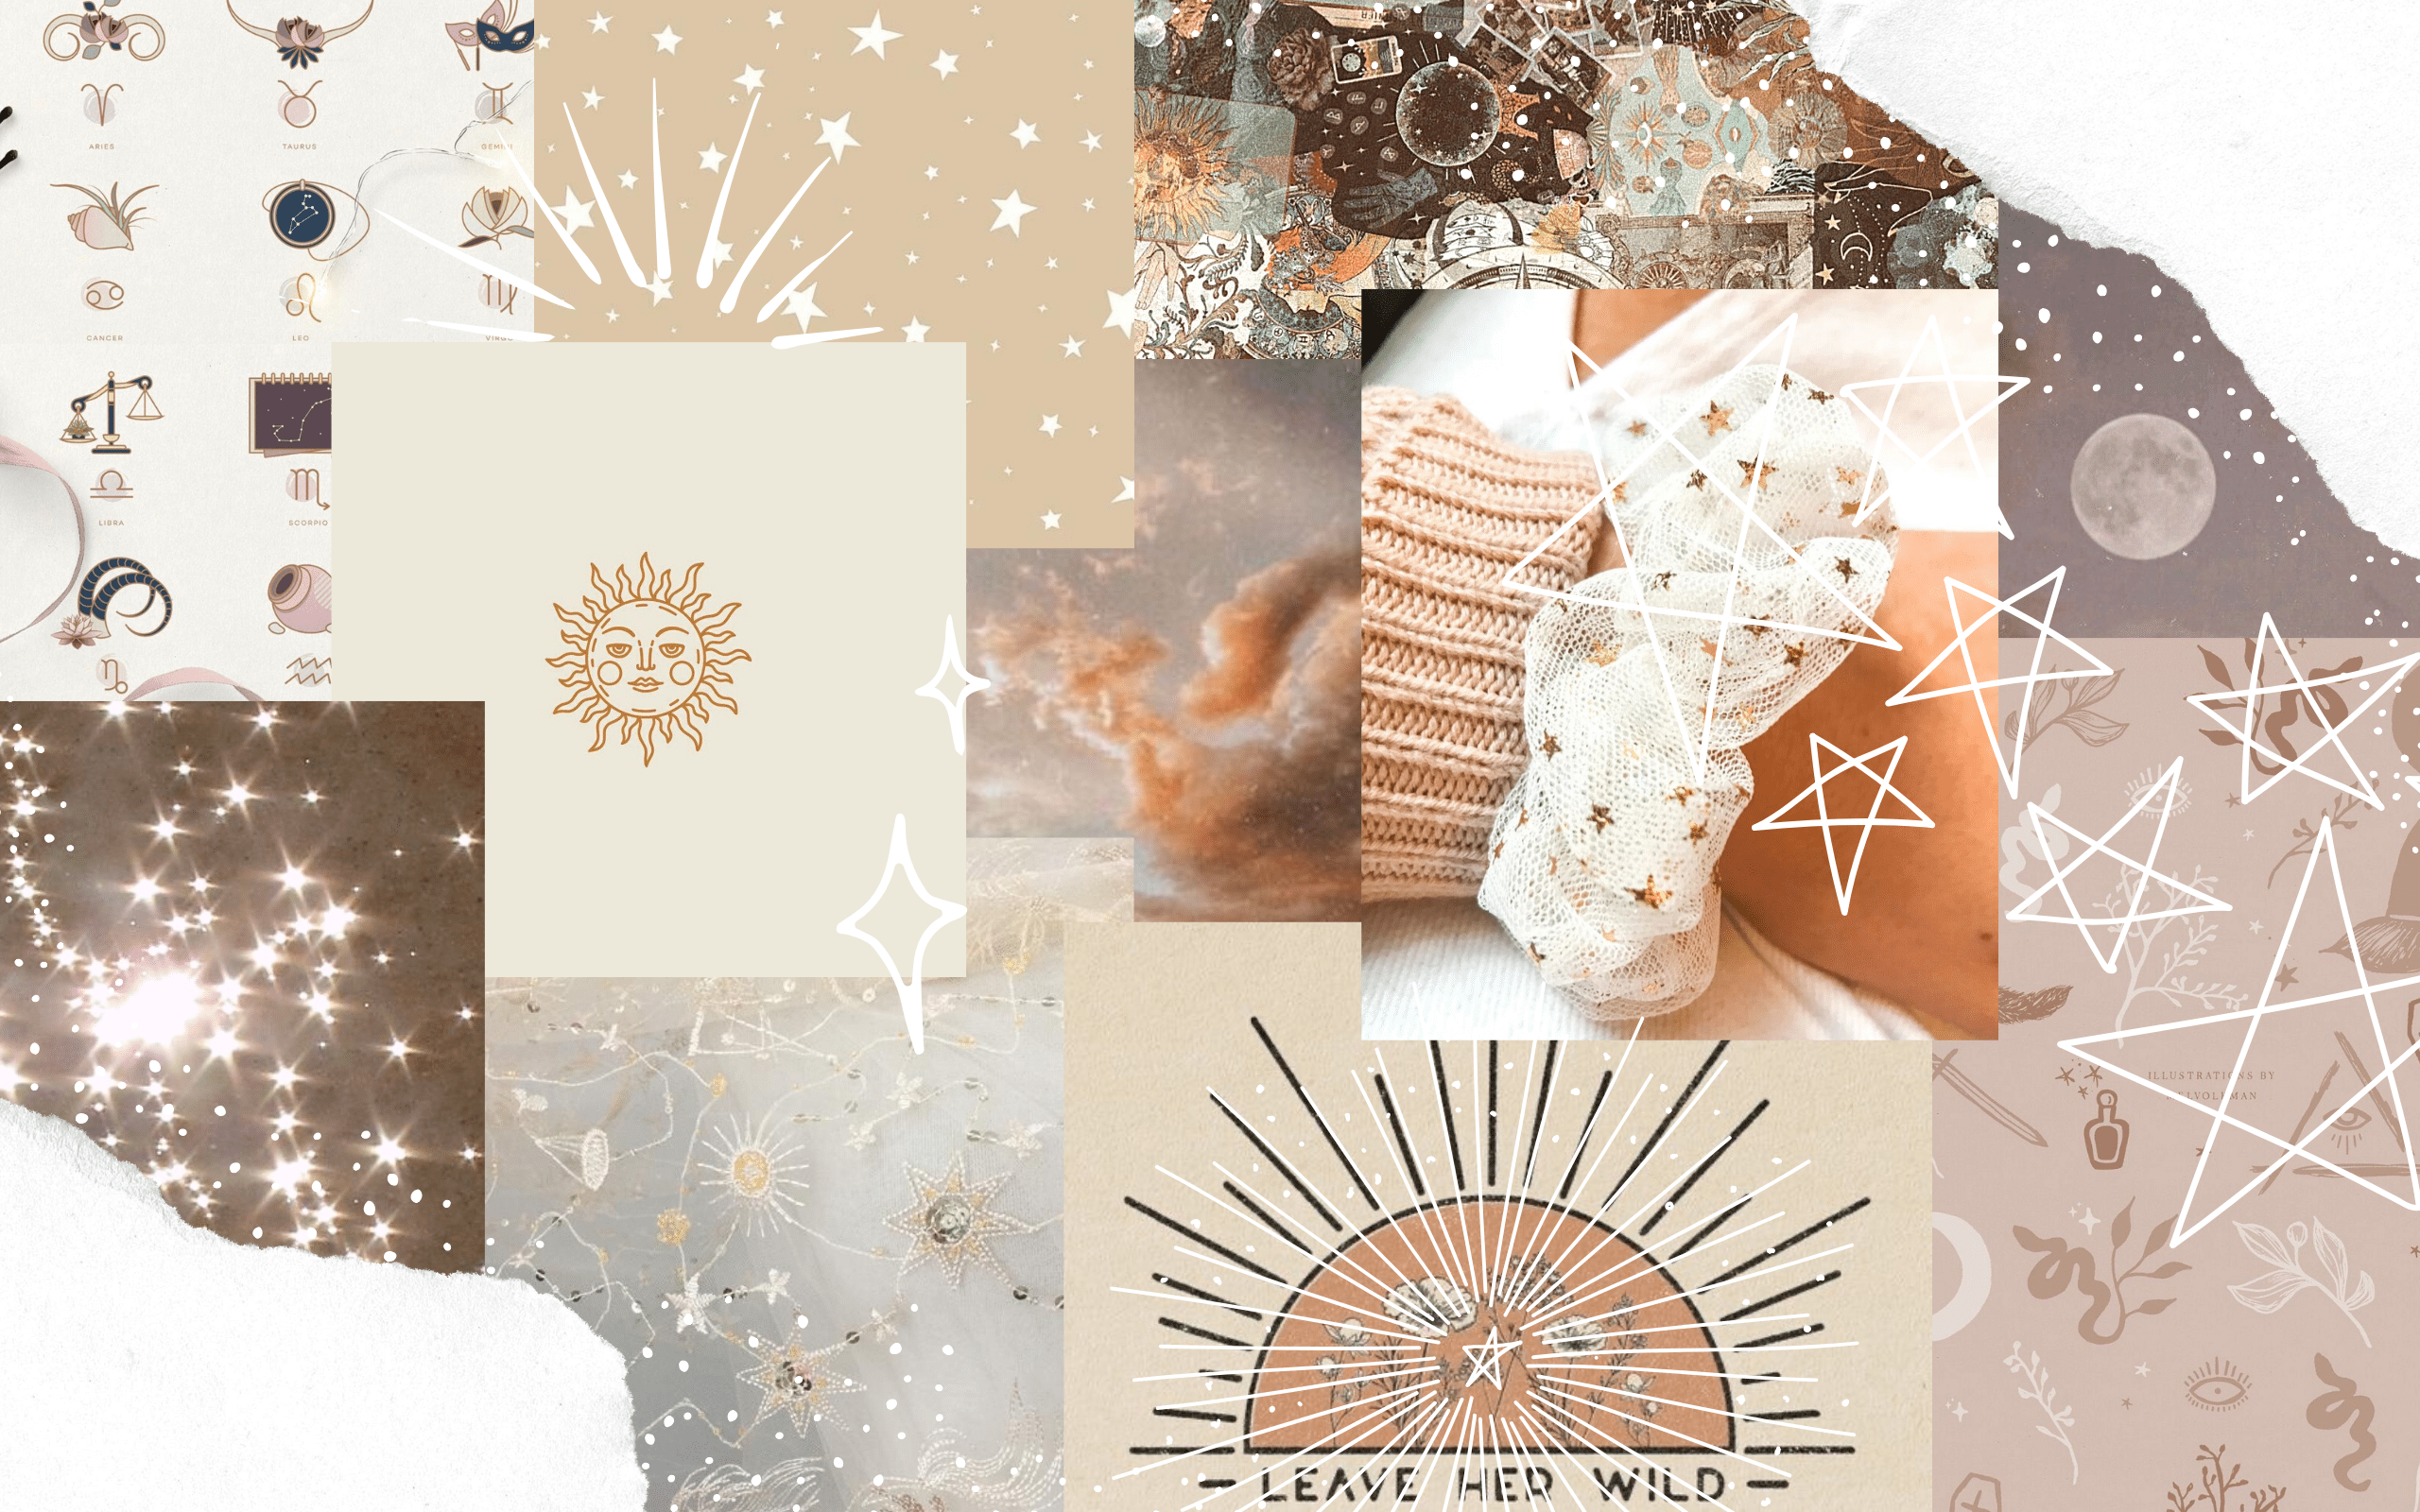 A collage of images, including a sun, clouds, and stars, on a beige and brown background. - Laptop